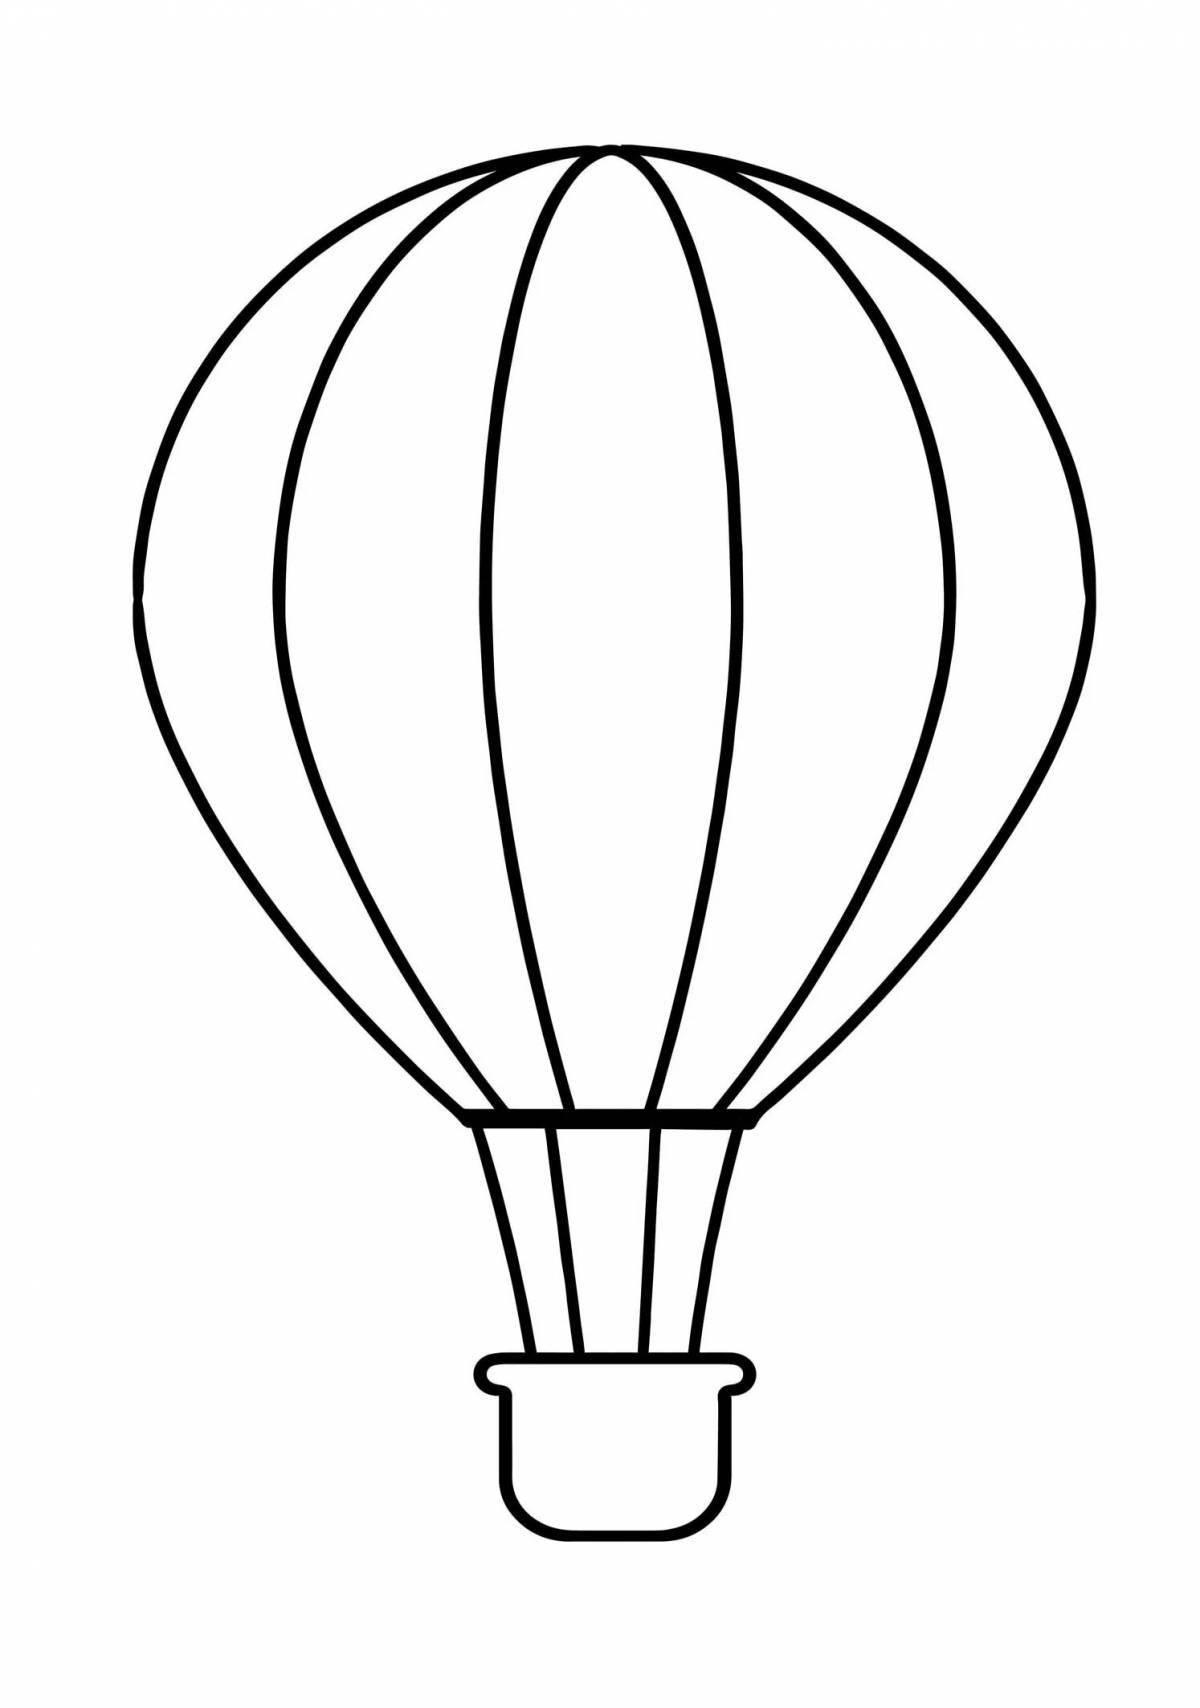 Gorgeous balloon with basket coloring book for kids